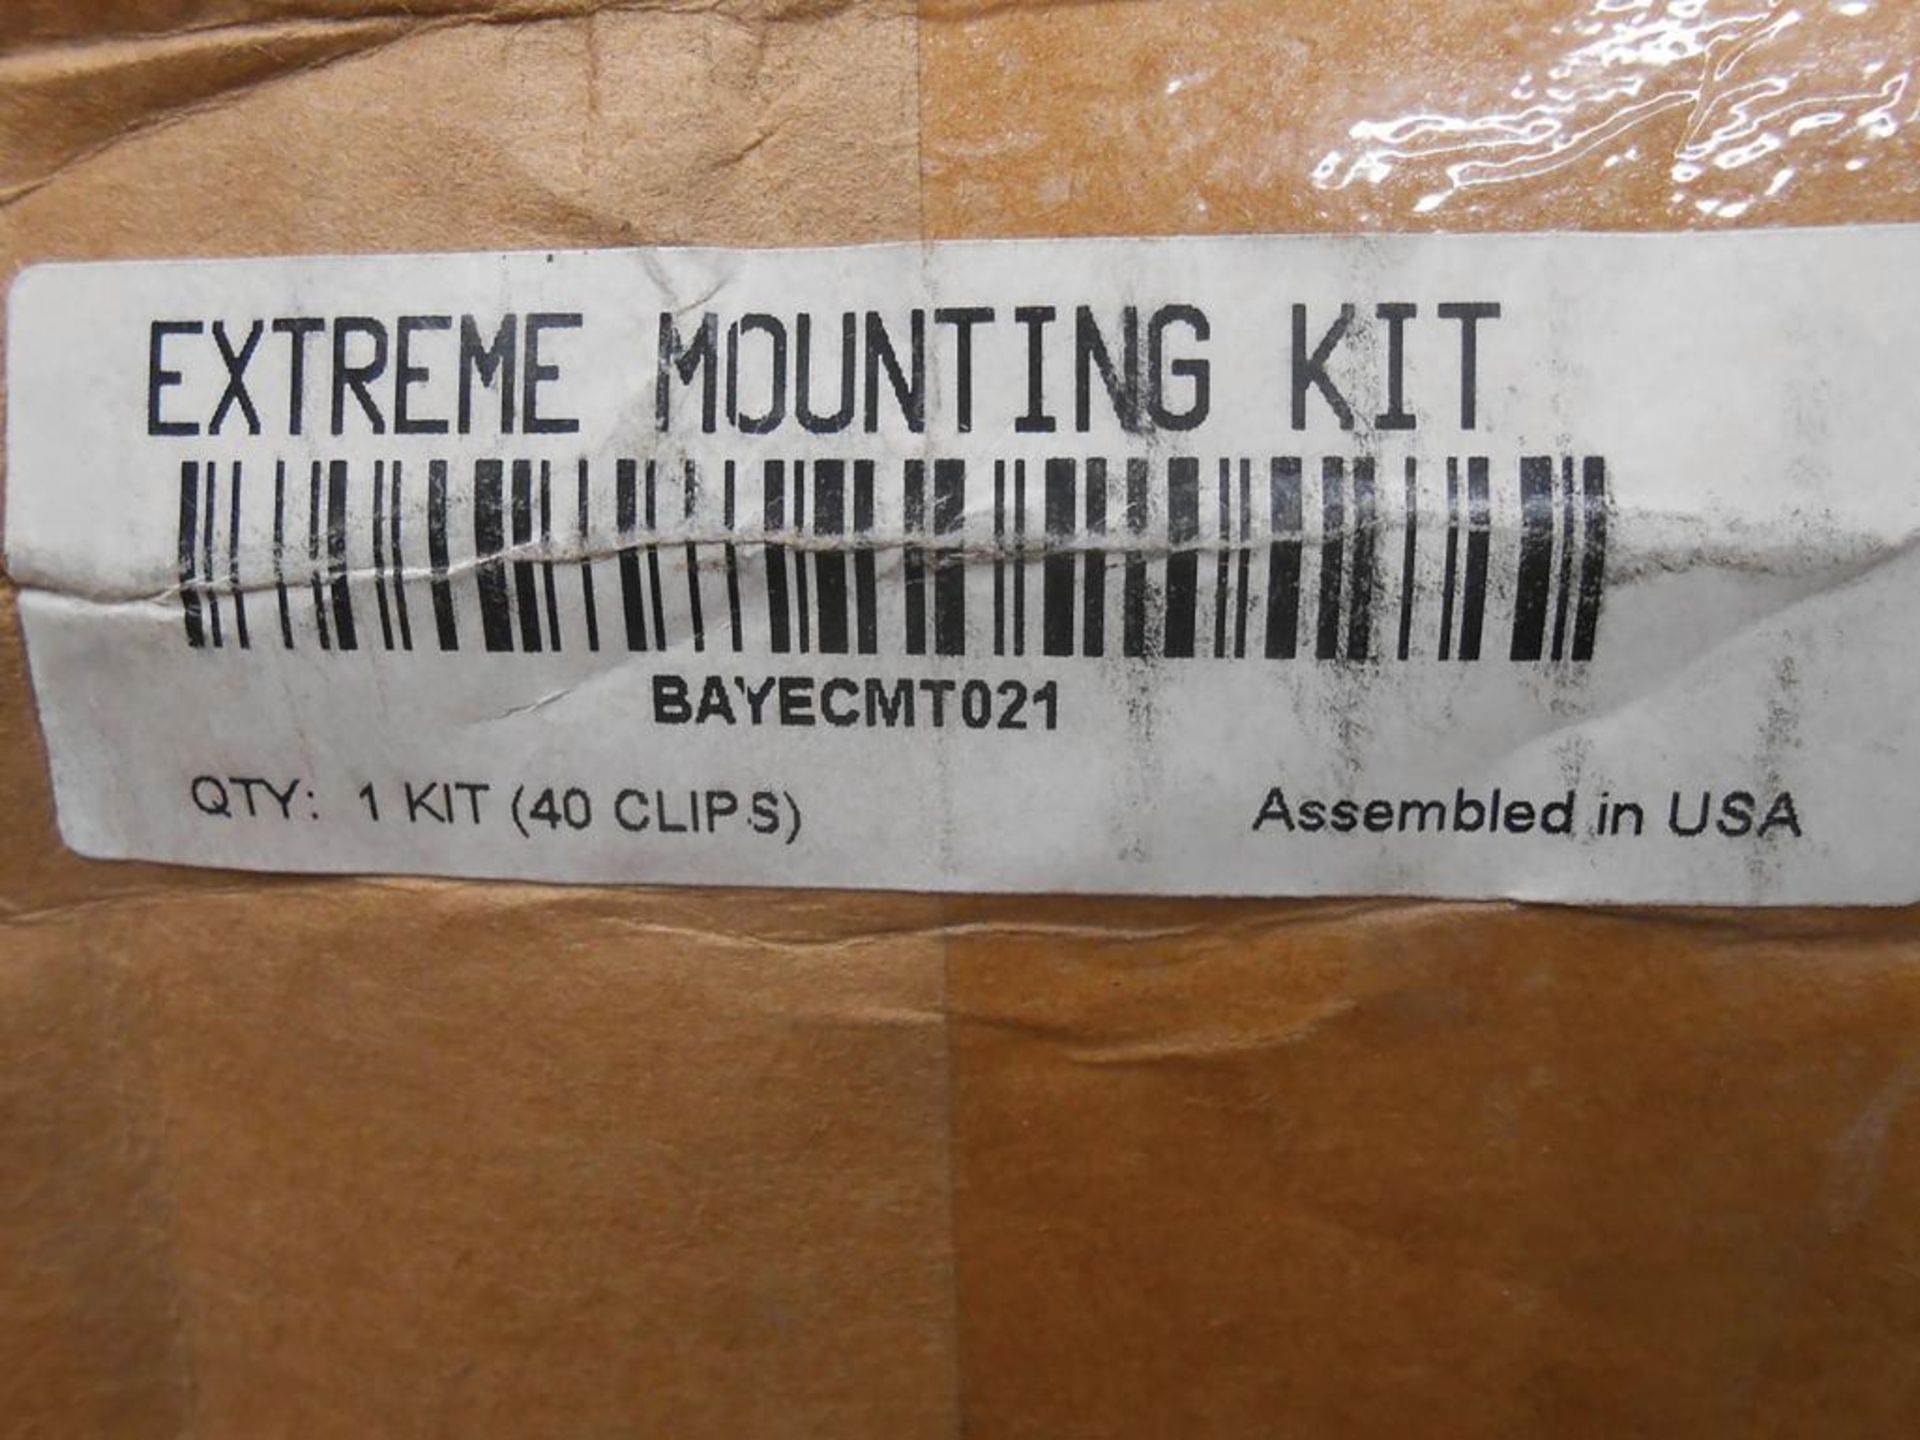 (50) Trane Extreme Mounting Kits, Model BAYECMT021, For Models 4ttm3018-060, 4a7m3018-060, Included - Image 2 of 3